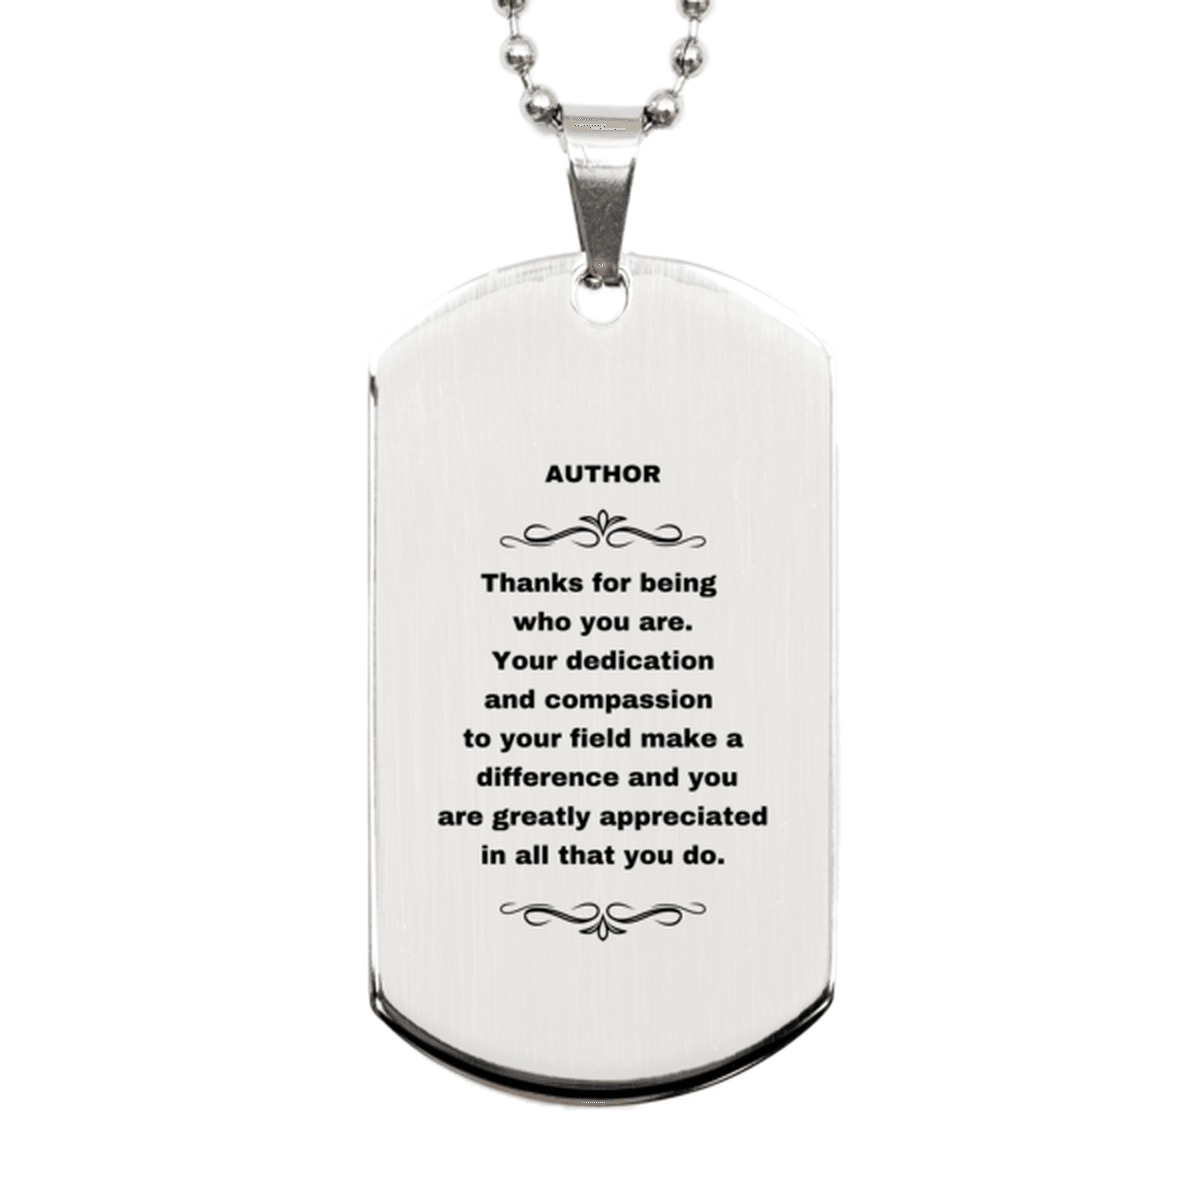 Author Silver Dog Tag Engraved Necklace - Thanks for being who you are - Birthday Christmas Jewelry Gifts Coworkers Colleague Boss - Mallard Moon Gift Shop